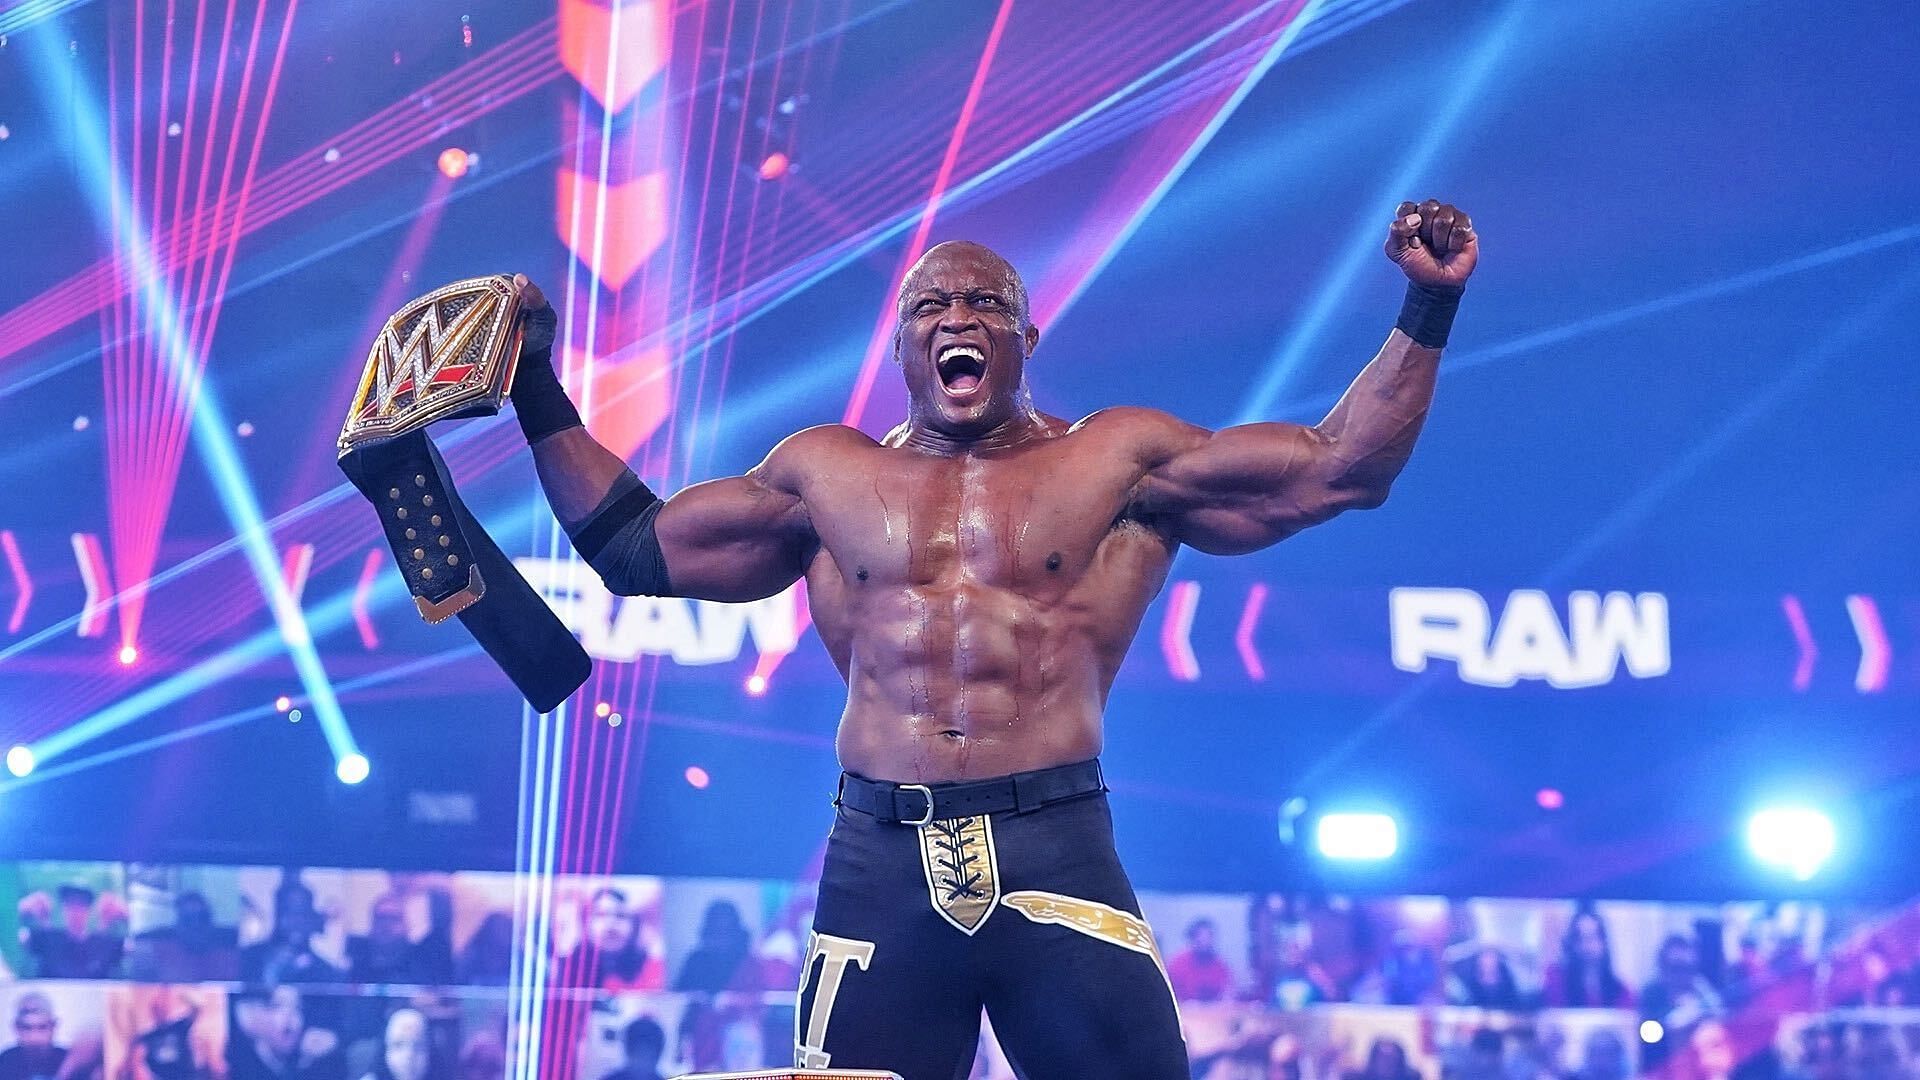 Lashley could walk out of Money In The Bank wearing gold